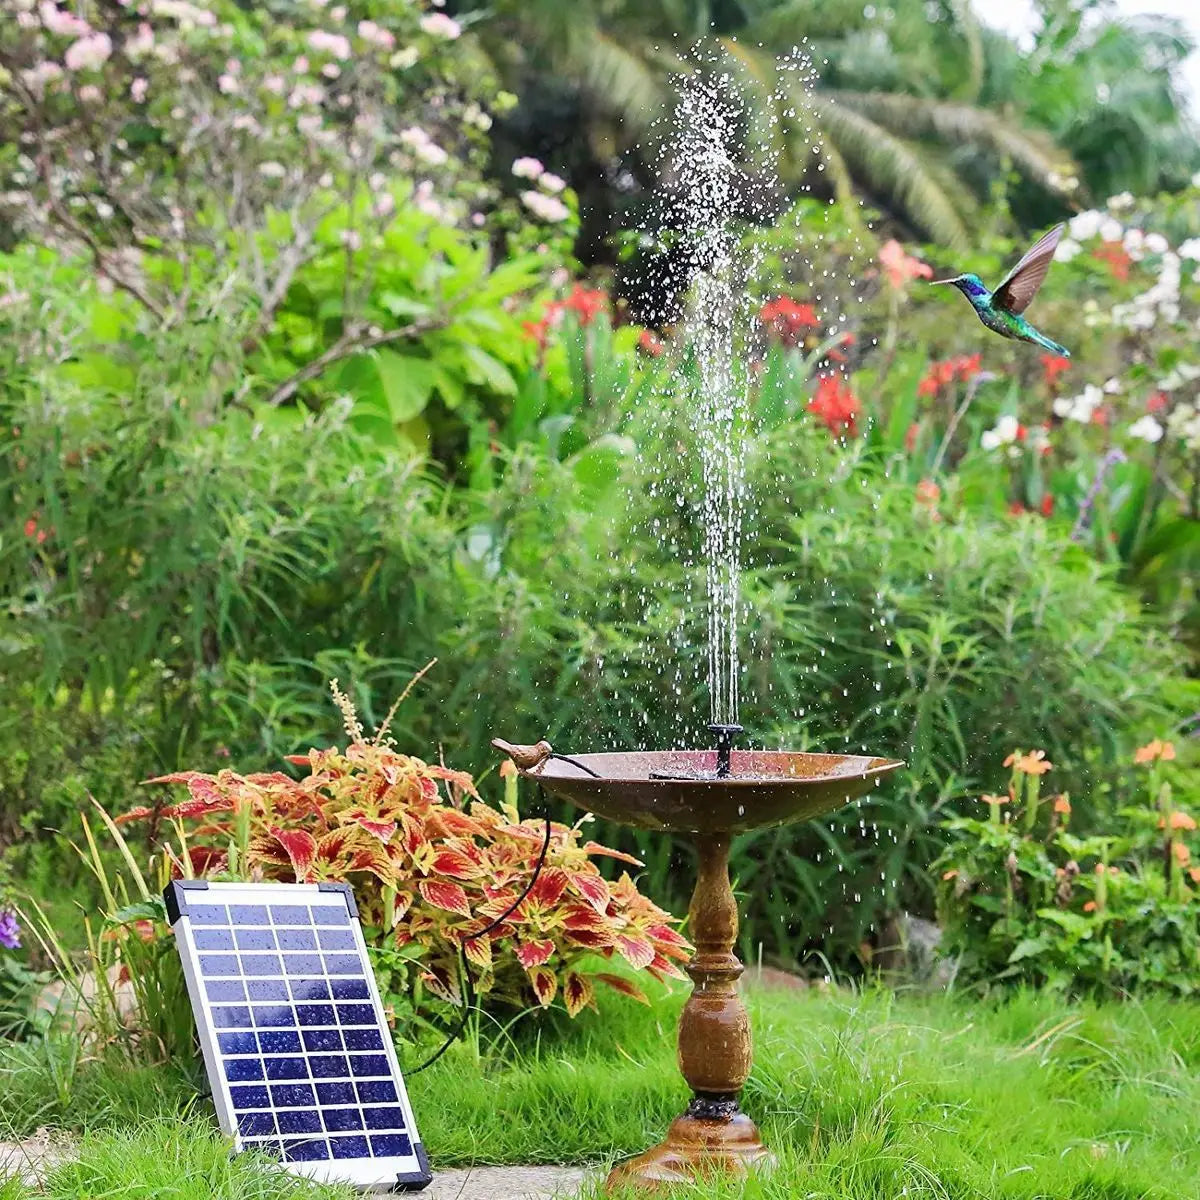 12V Solar Panel Charging Water Pump Set, Solar-powered pump set for decorative water features, suitable for gardens and ponds.